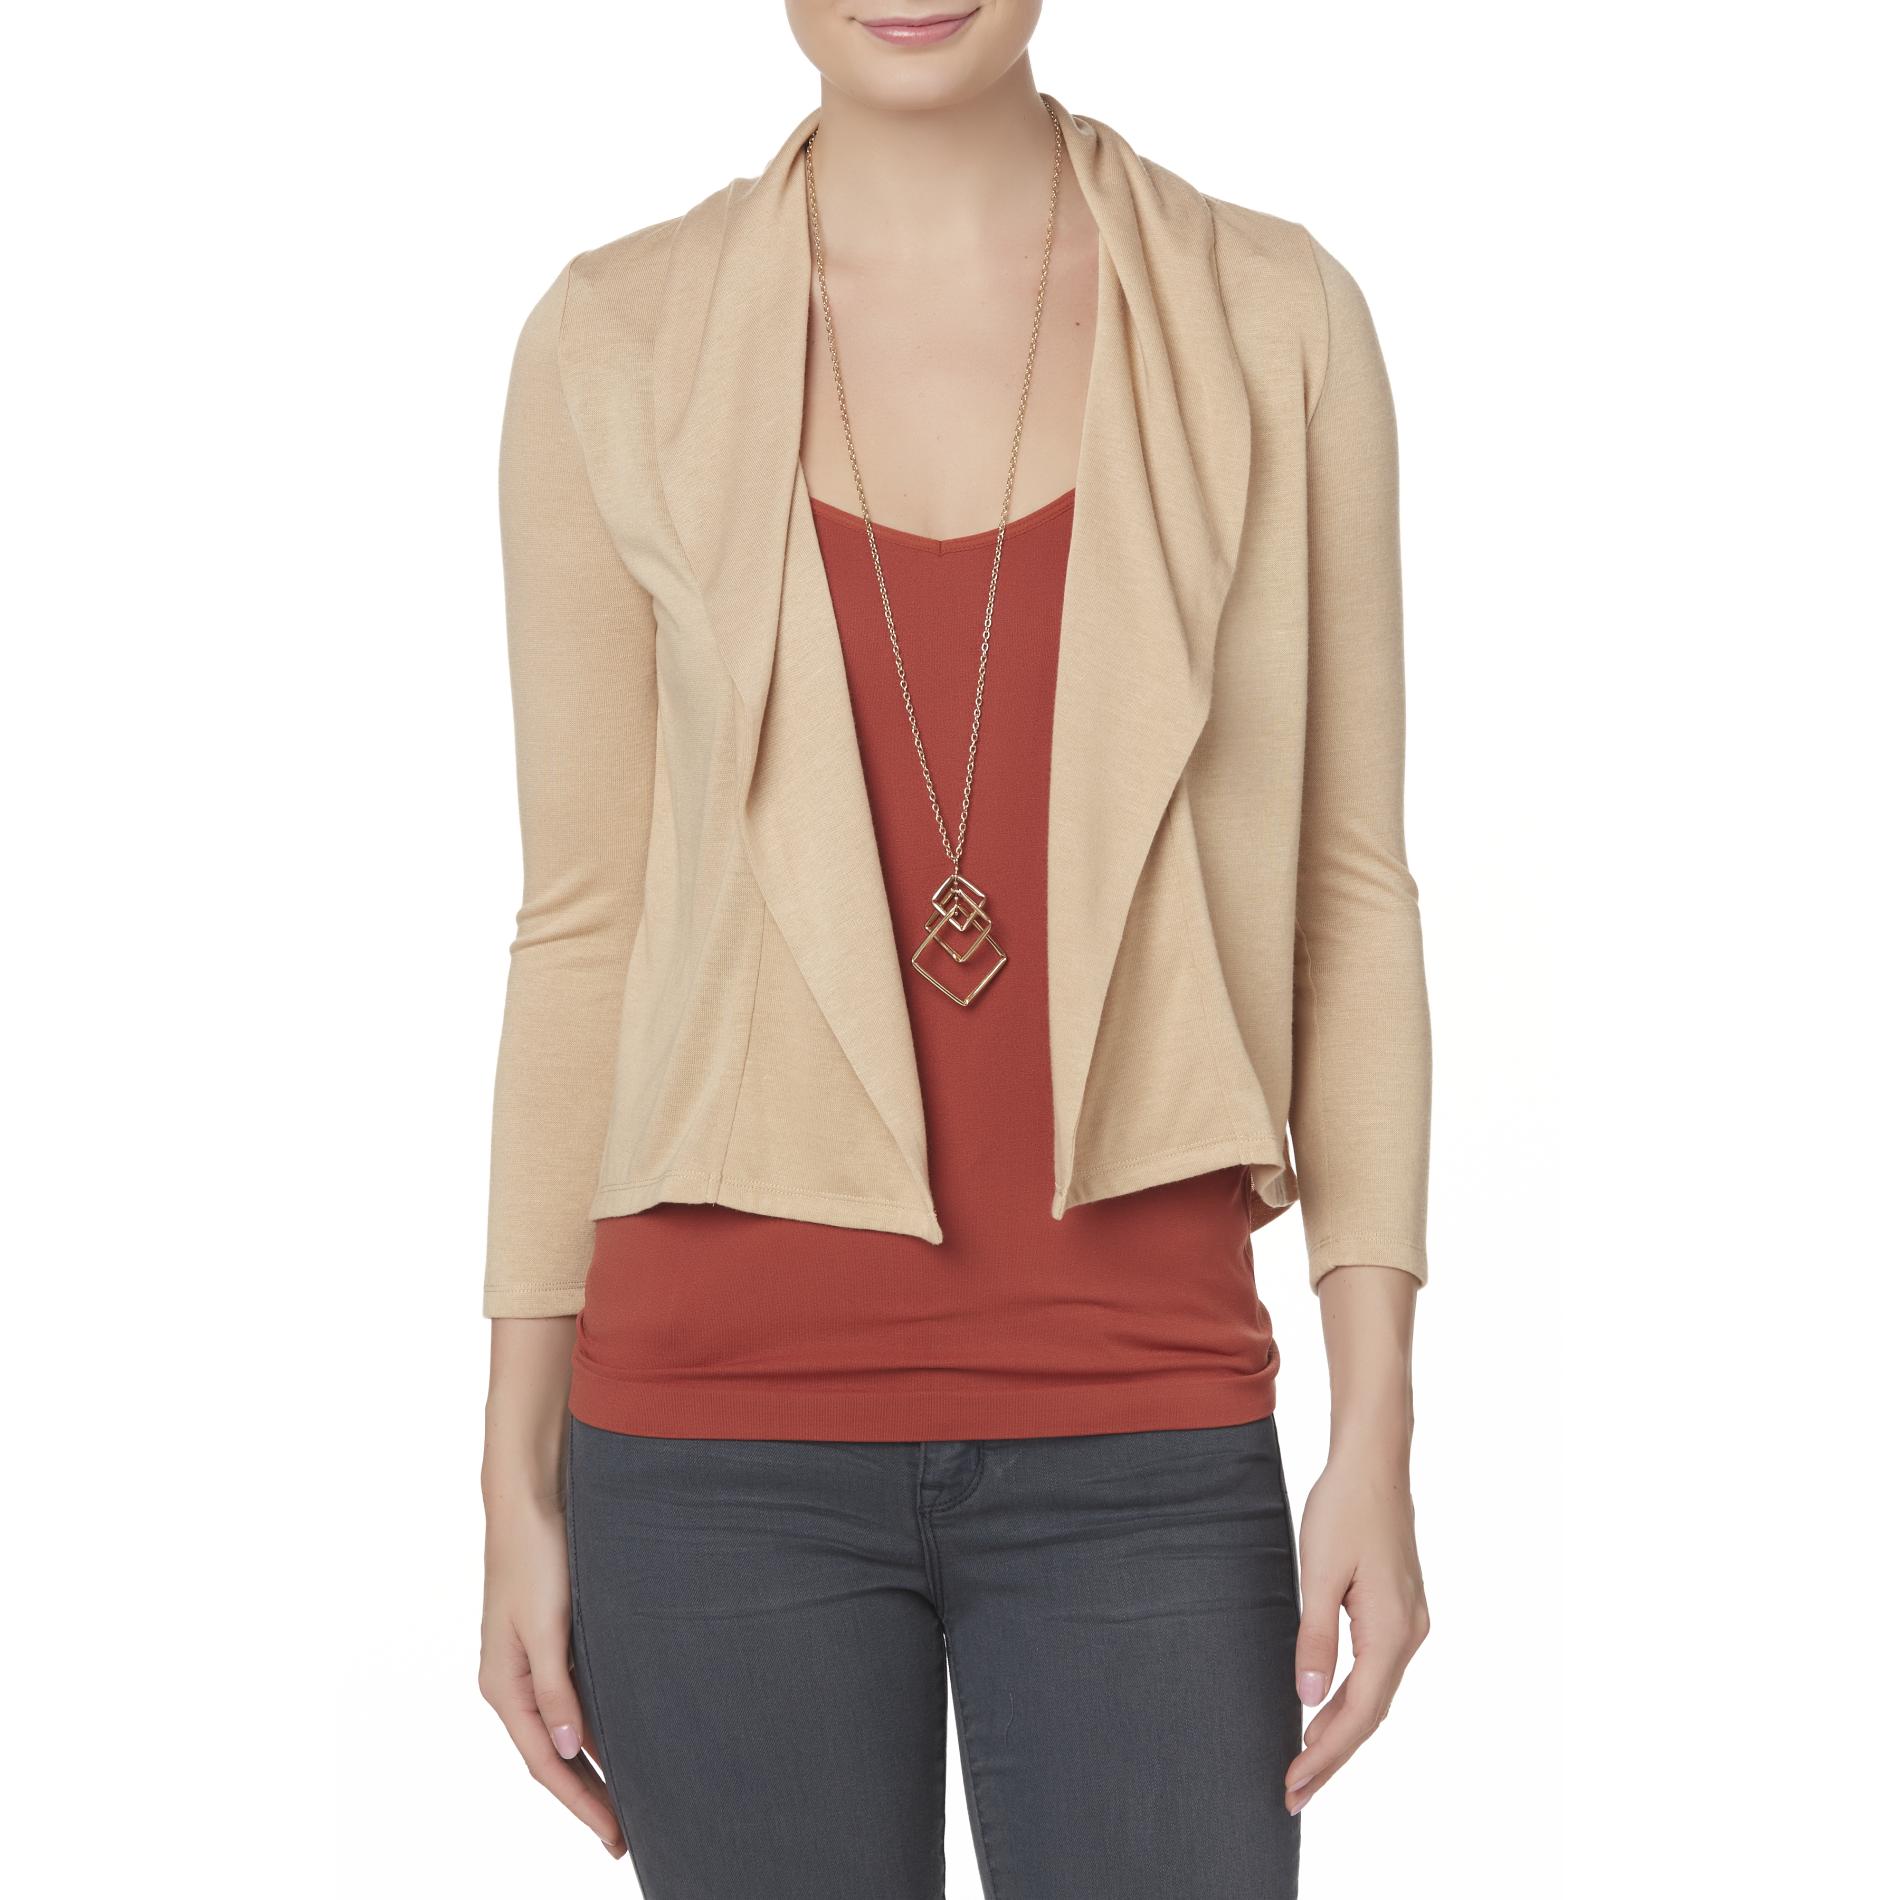 Simply Styled Girls' Open-Front Cardigan